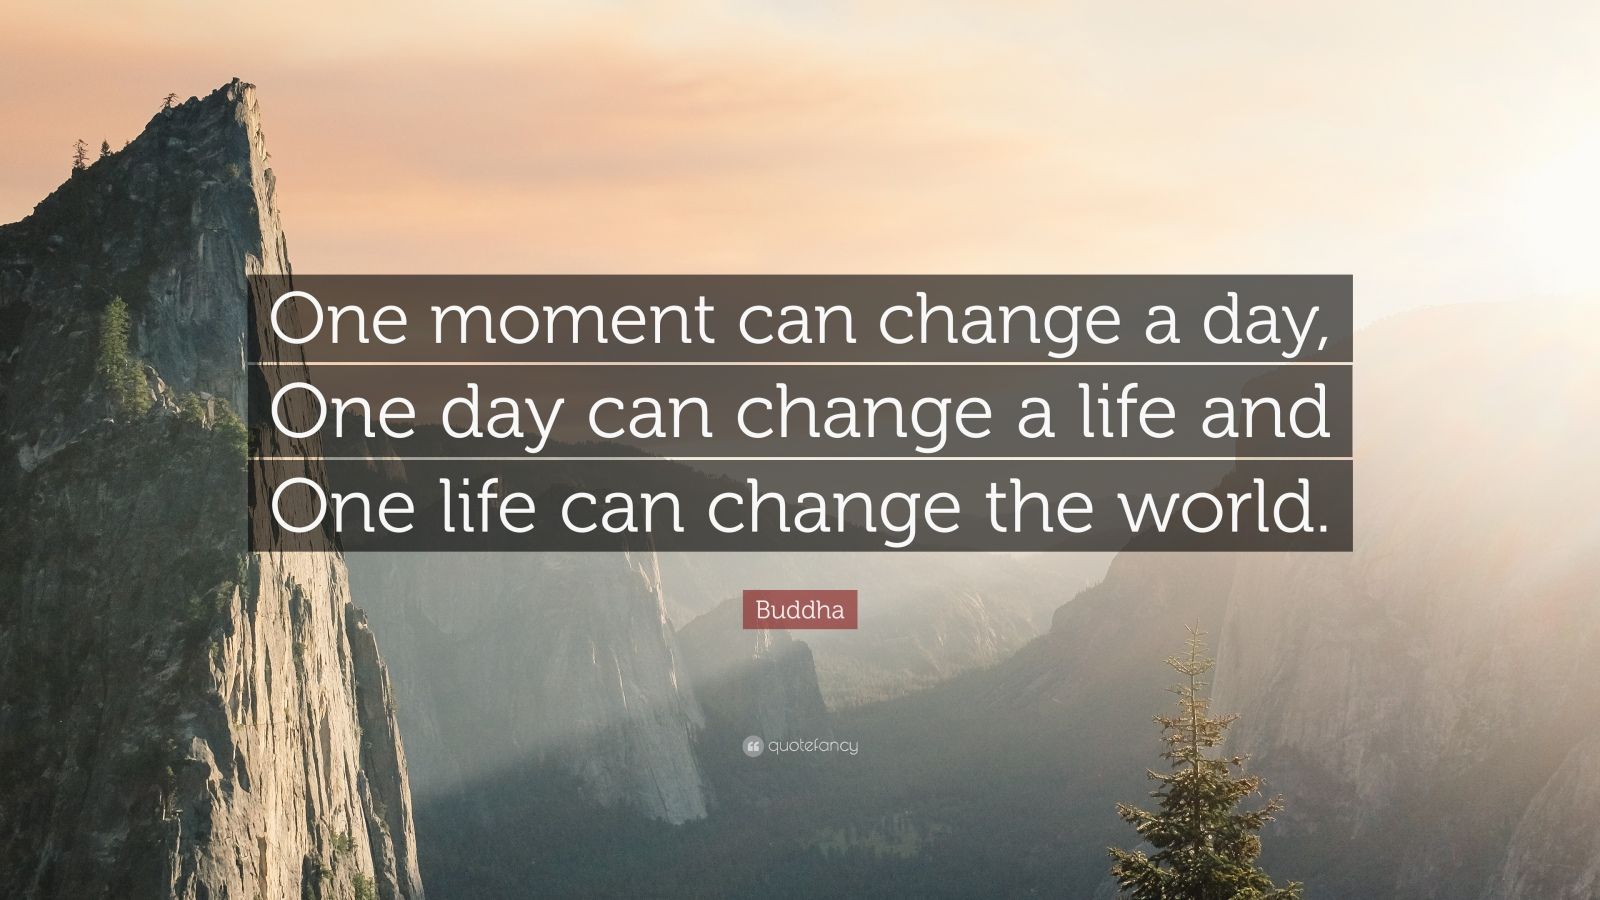 Buddha Quote: “One moment can change a day, One day can change a life